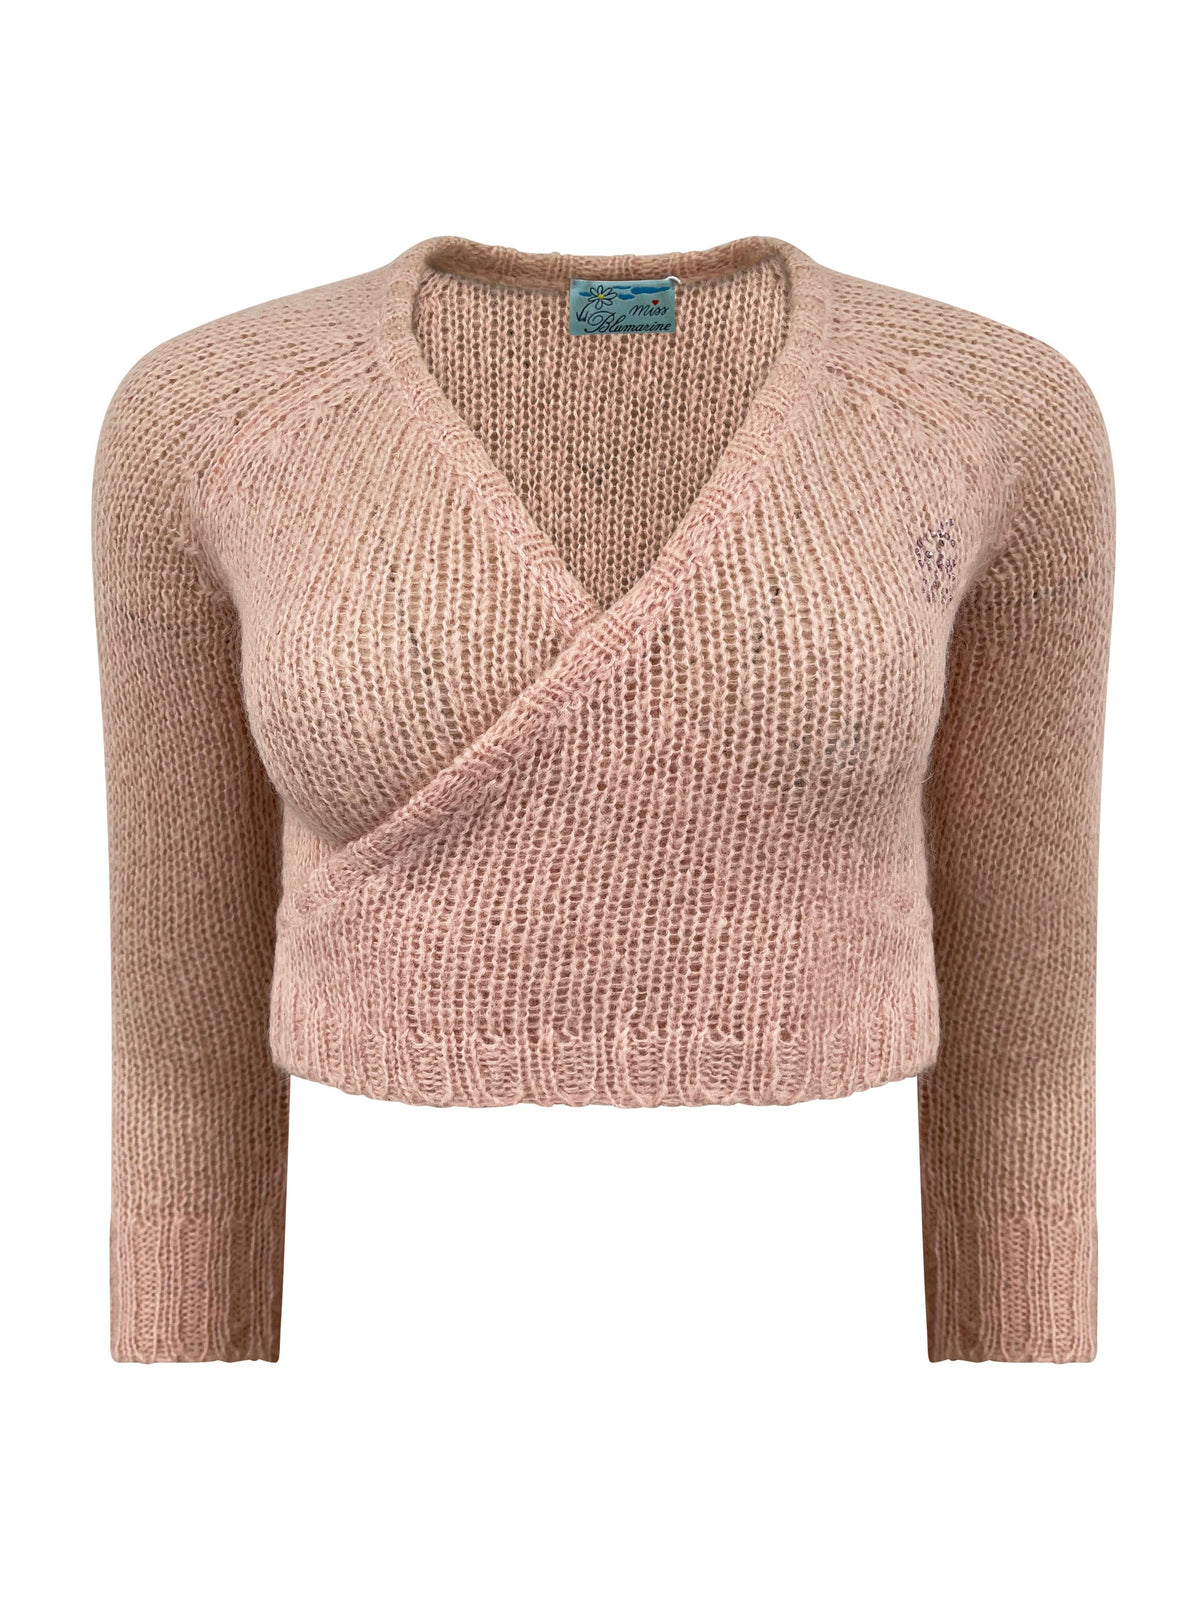 2000's Blumarine Baby Pink Wrap Cardigan - ONFEMME By Lindsey's Kloset